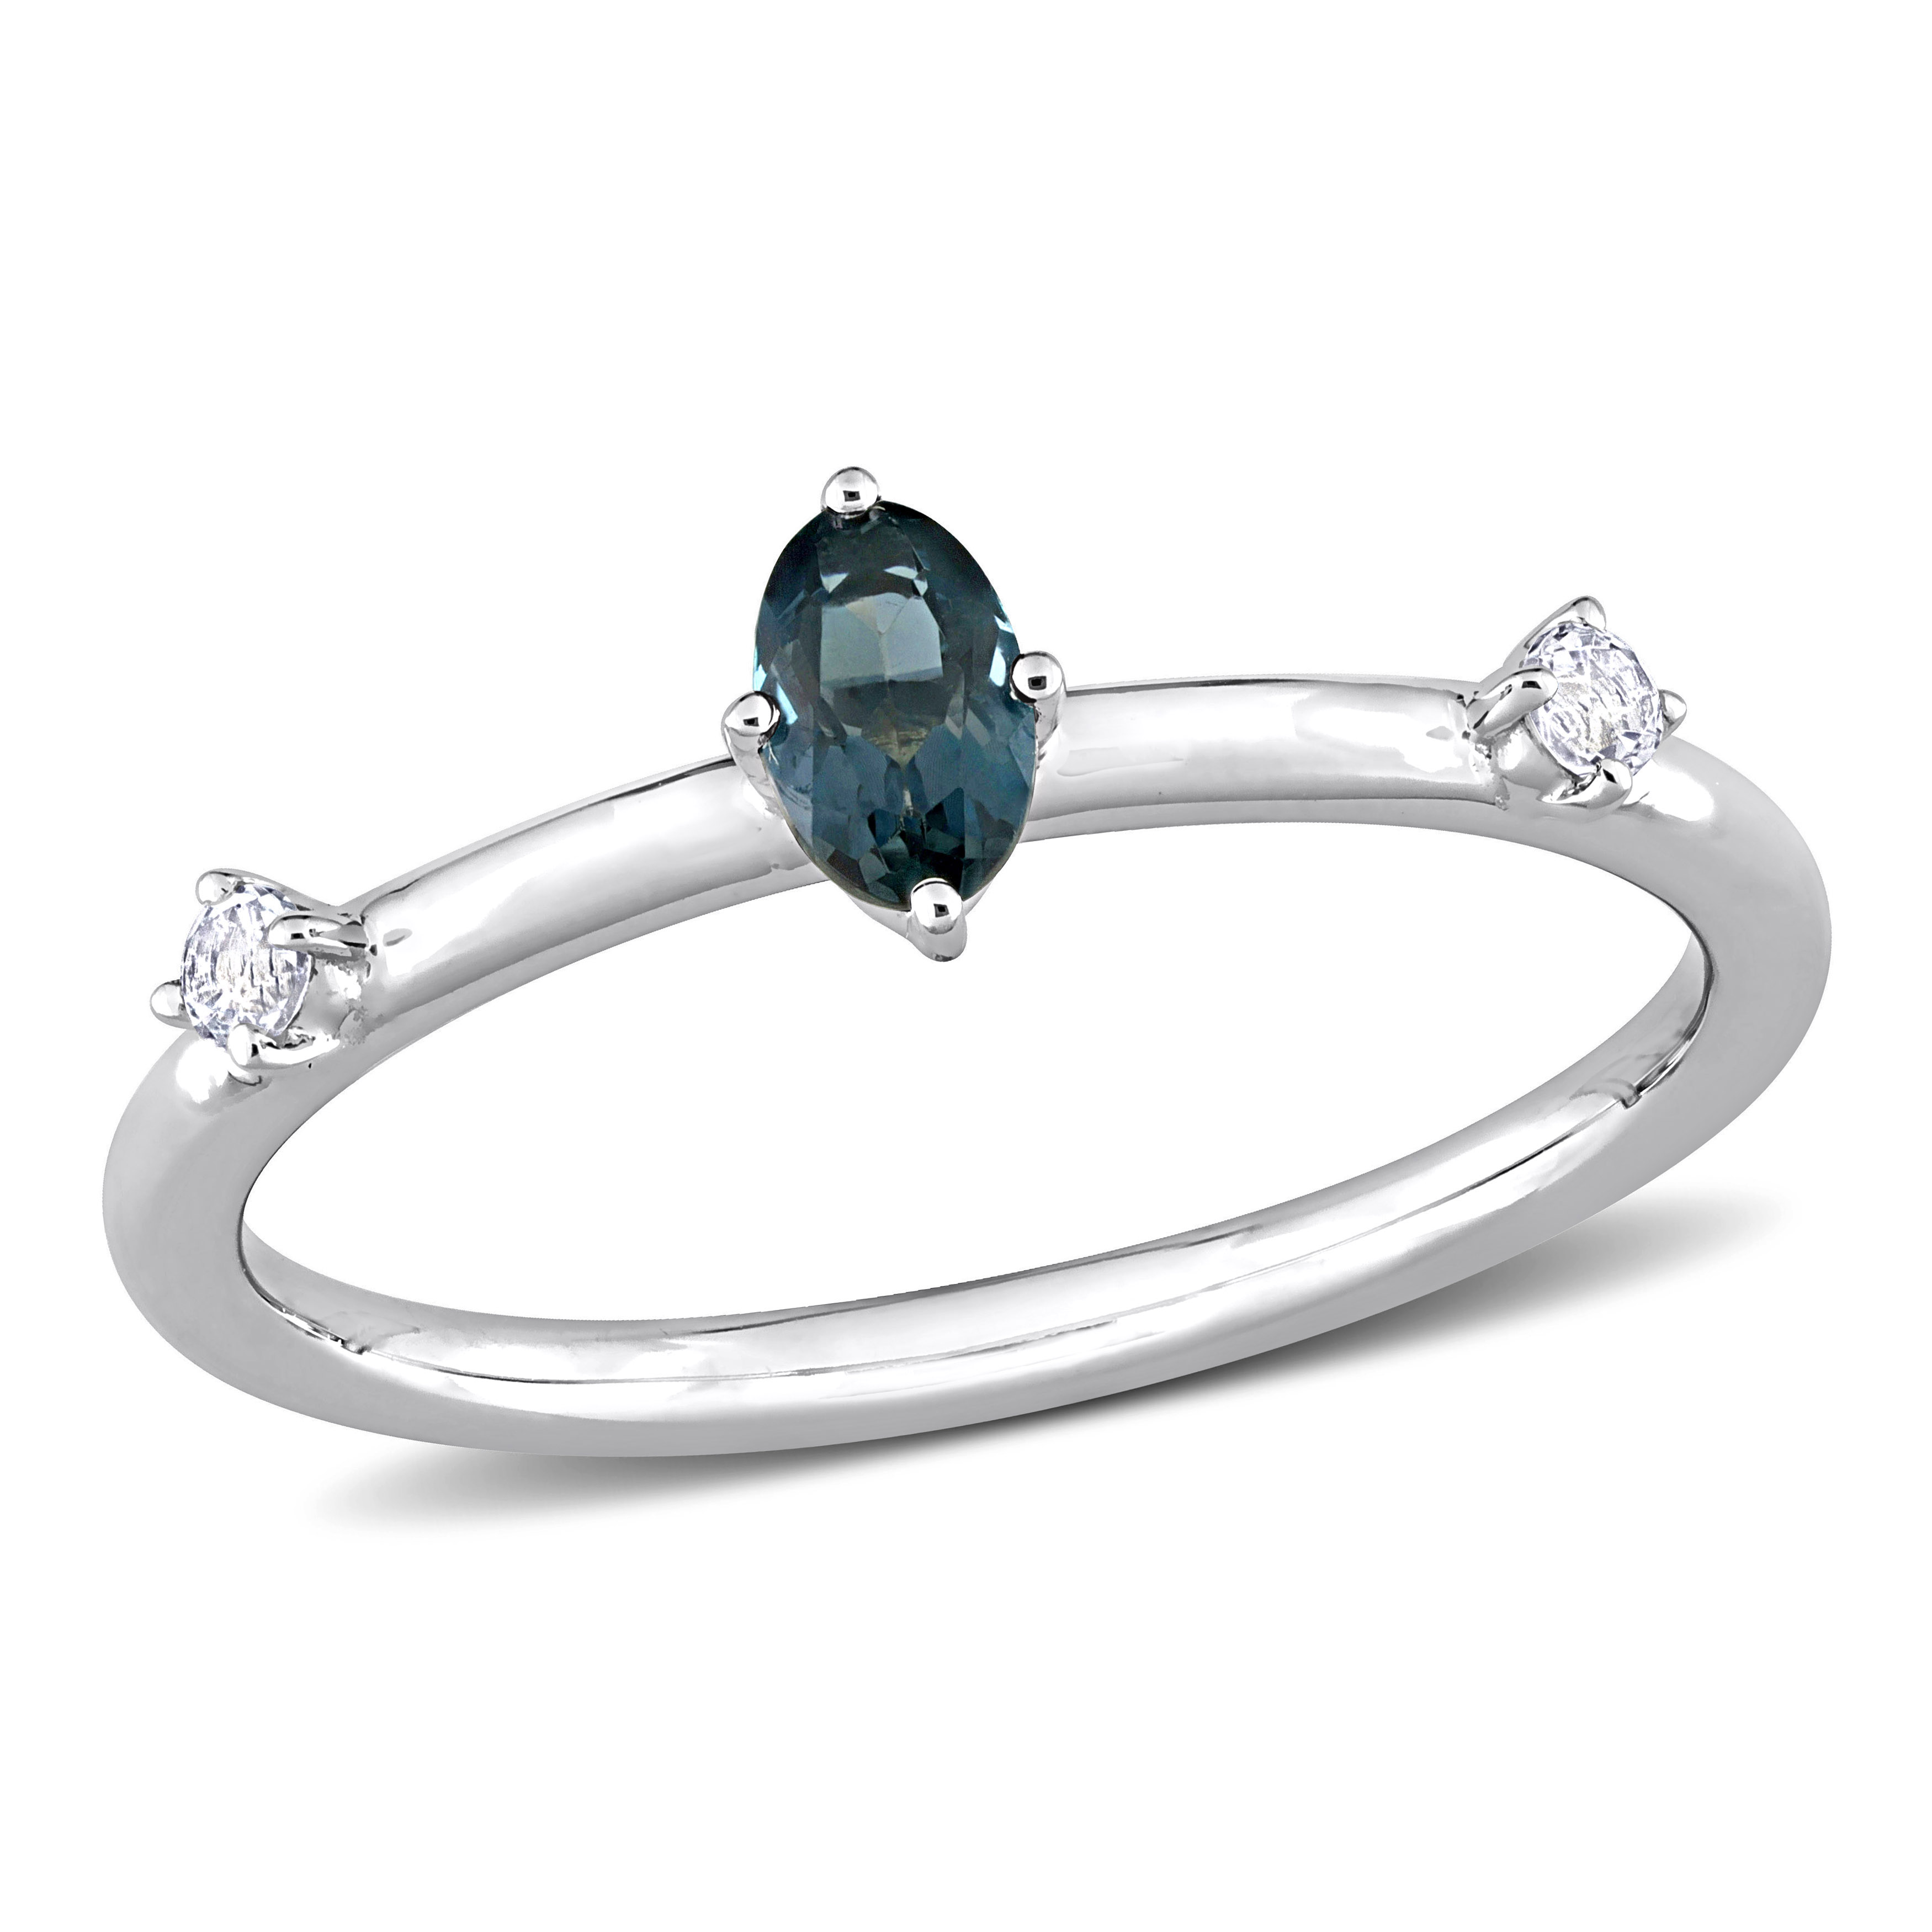 1/3 CT TGW Oval London Blue Topaz and White Topaz Stackable Ring in 10k White Gold